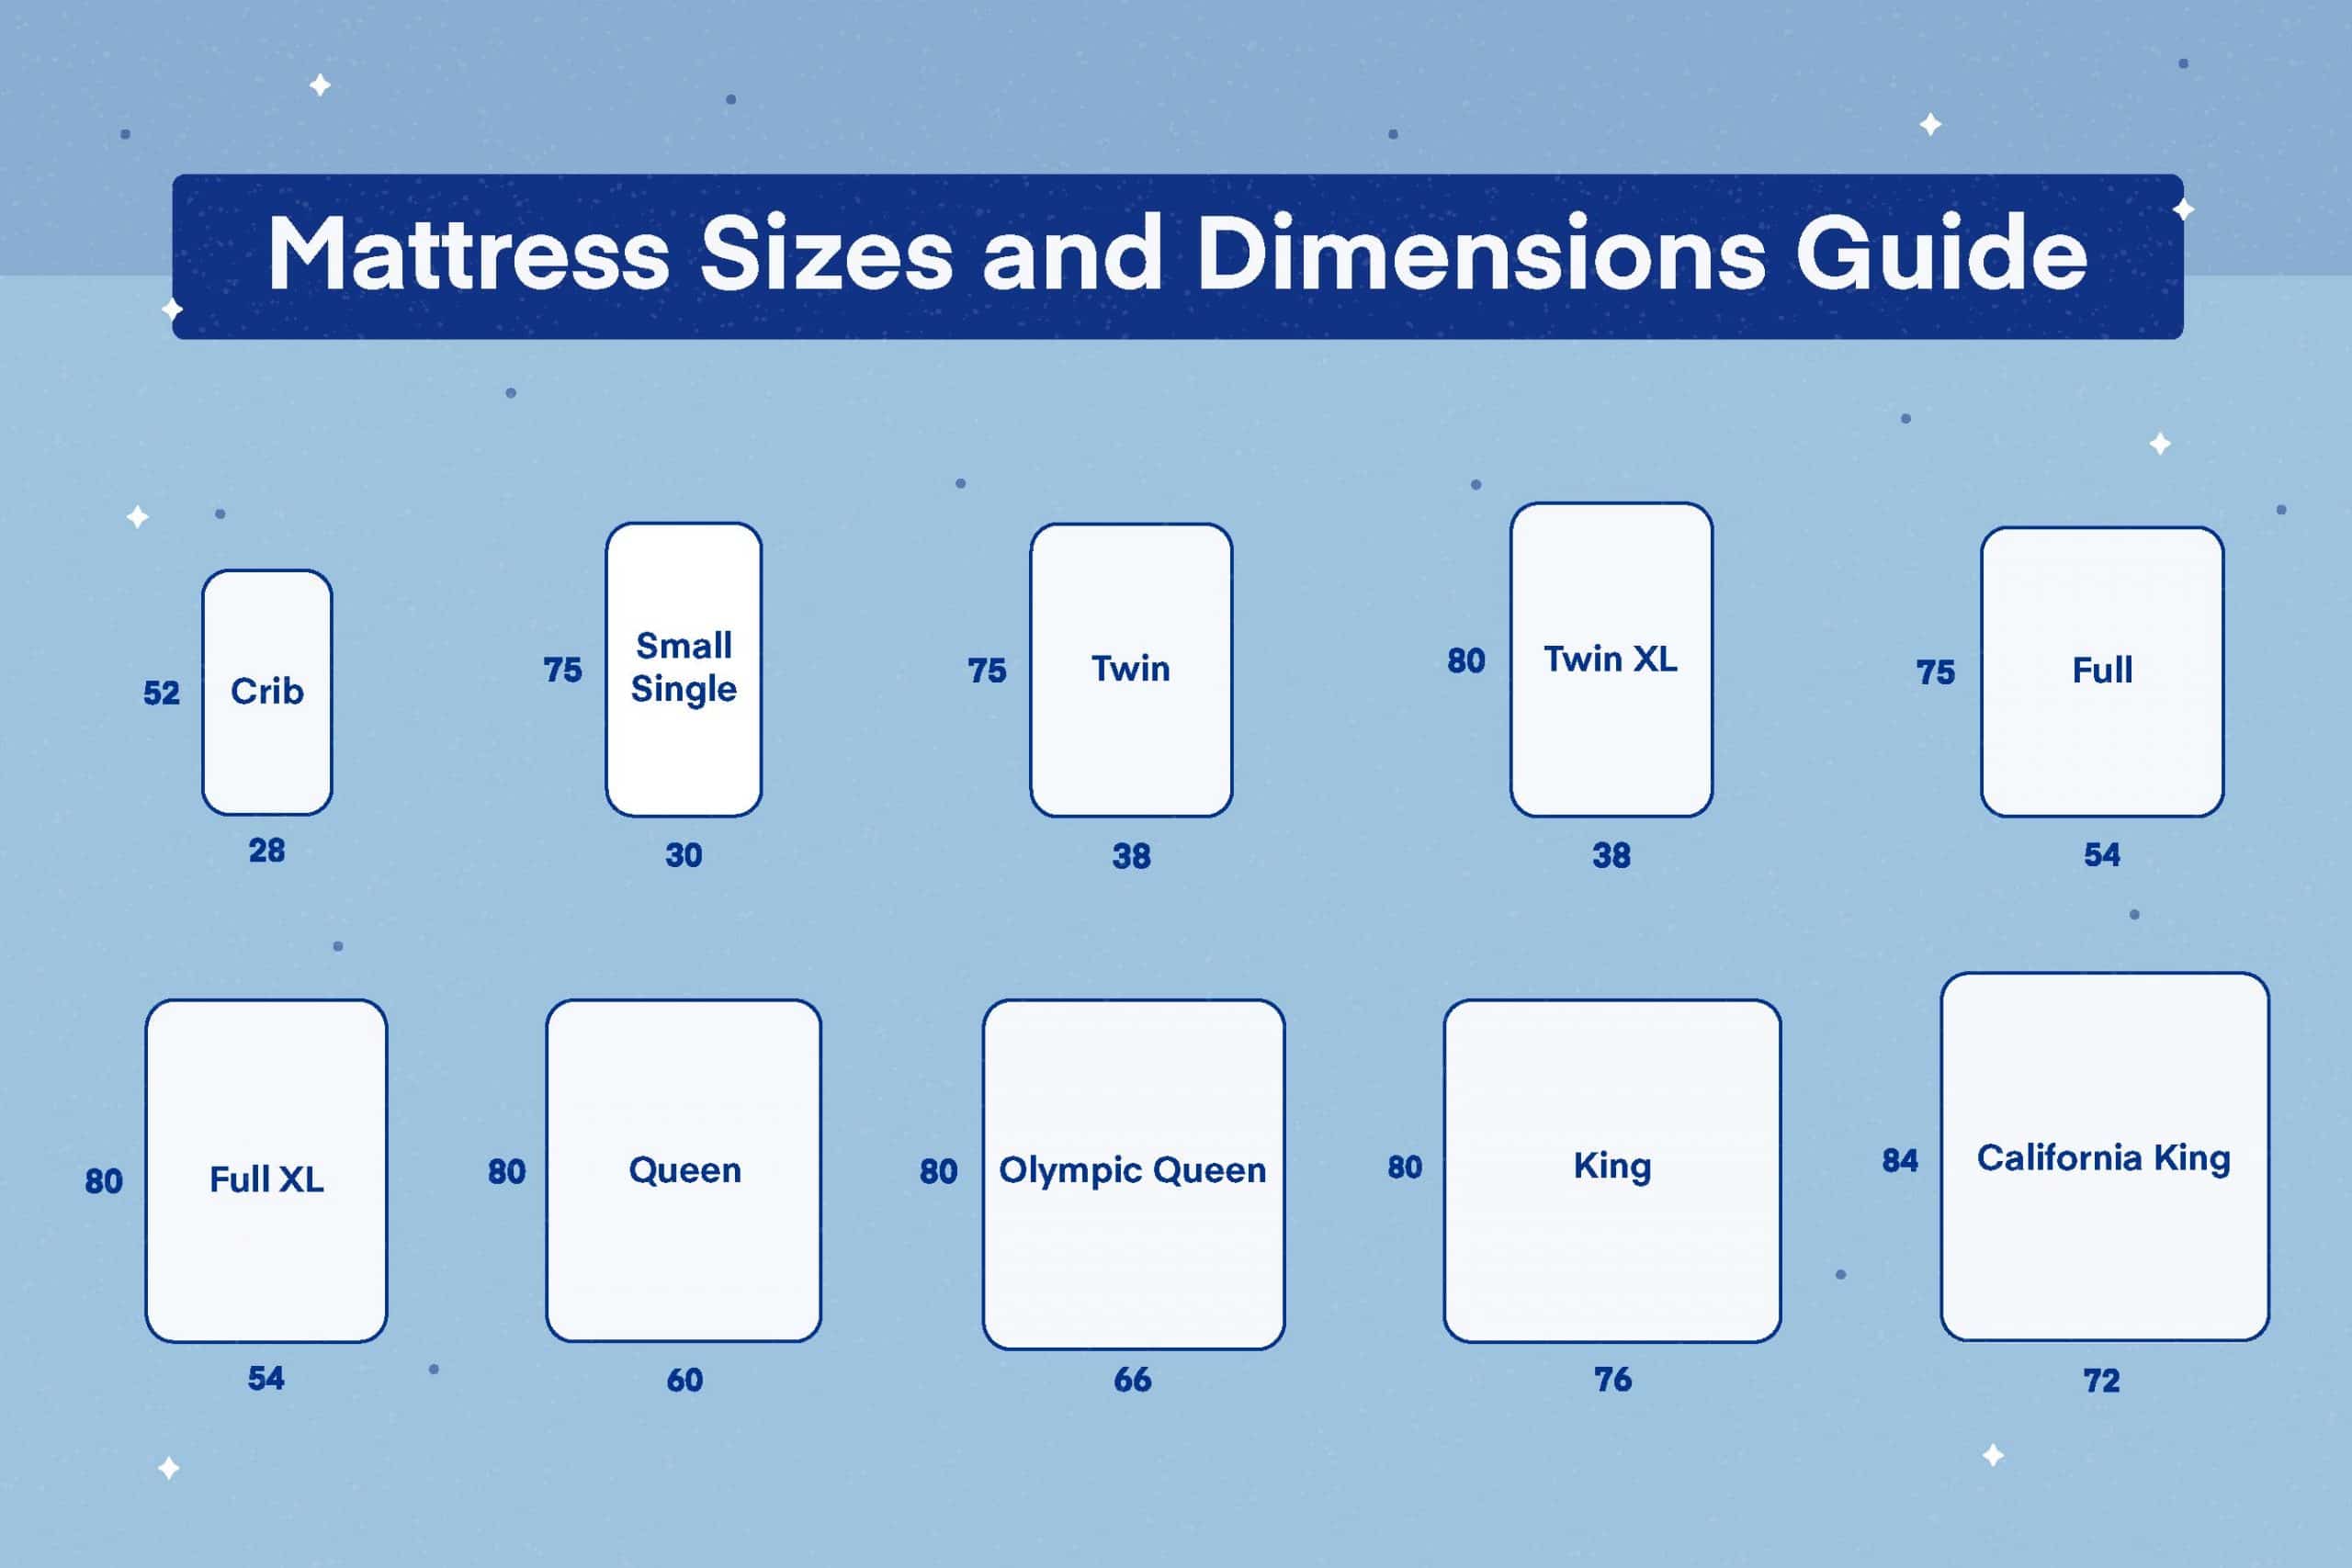 Dimensions of the king mattress